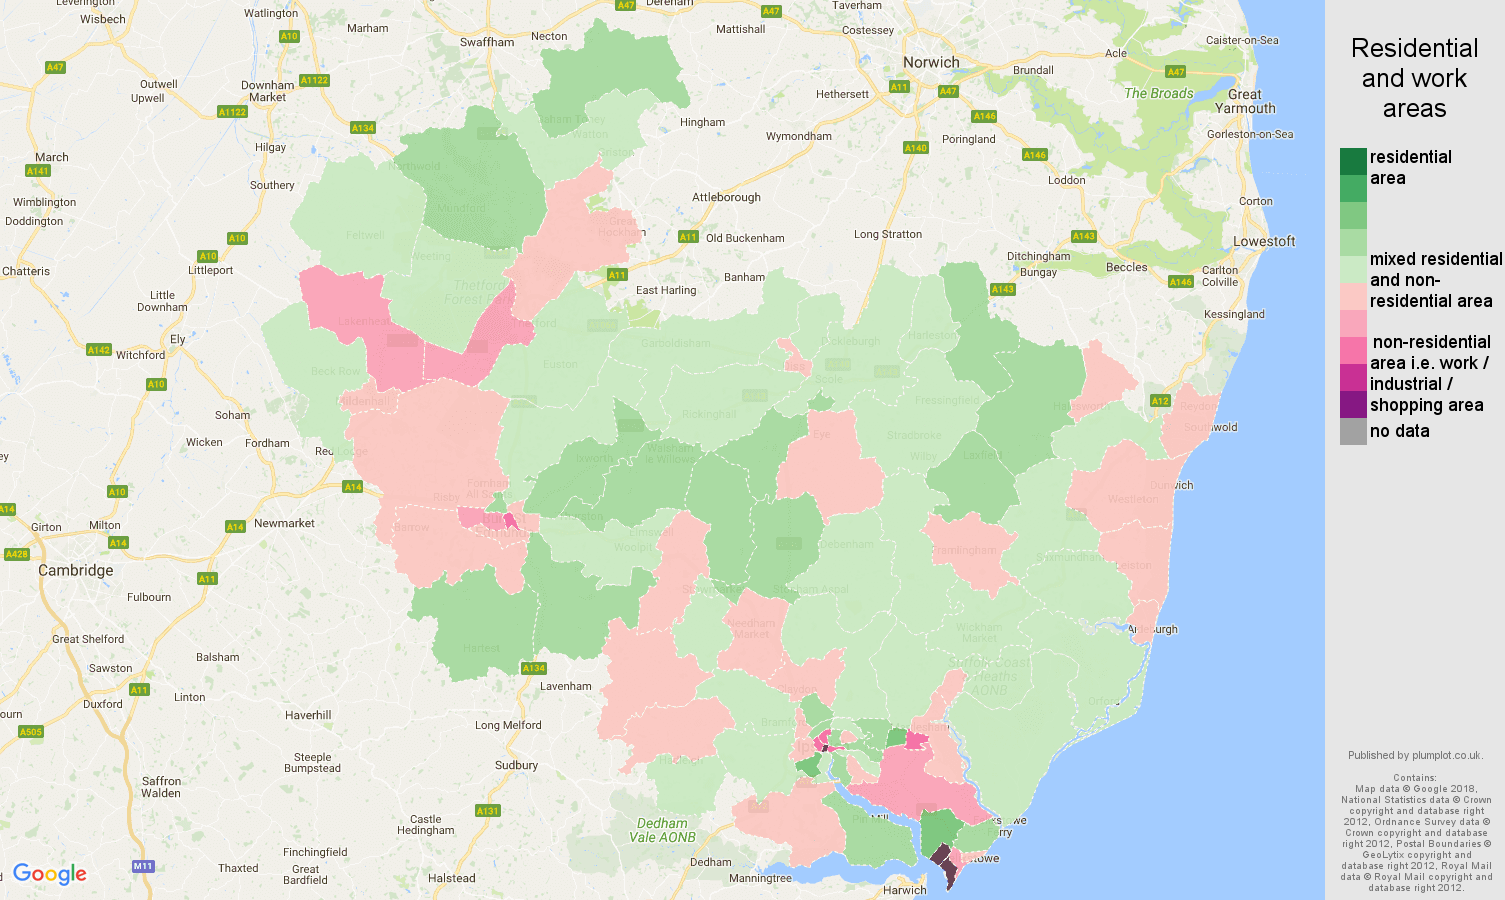 Ipswich residential areas map